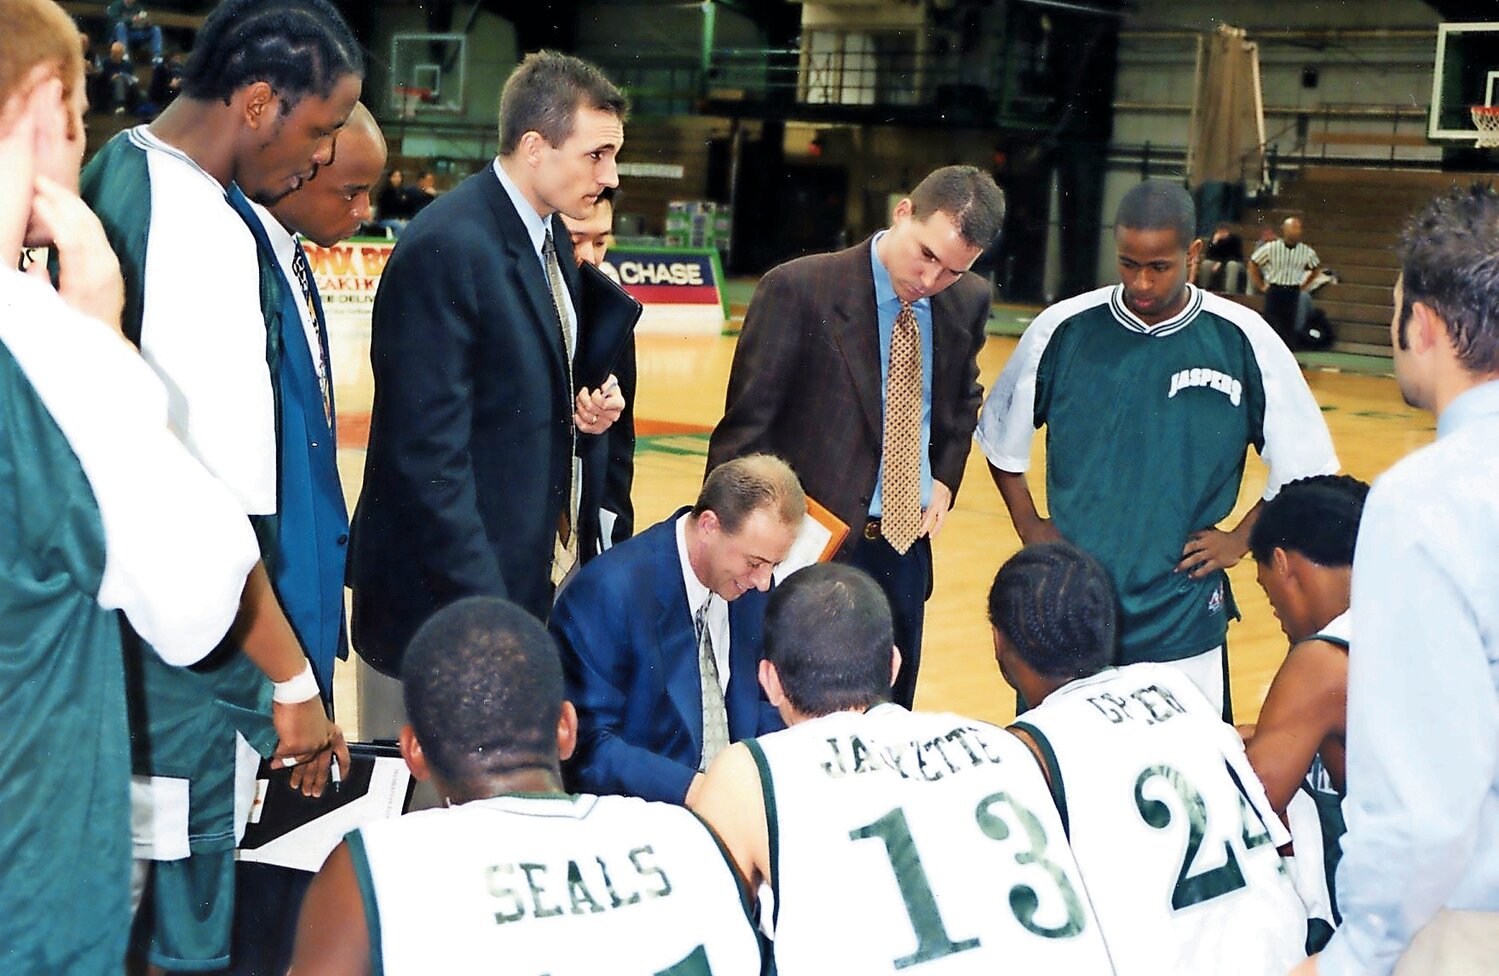 Mike Malone made three different stops at the collegiate level, including at Manhattan College, before finding a coaching home in the NBA. The son of former coach Brendan Malone, Mike worked with four different organizations before becoming head coach of the Sacramento Kings and now with the Denver Nuggets.